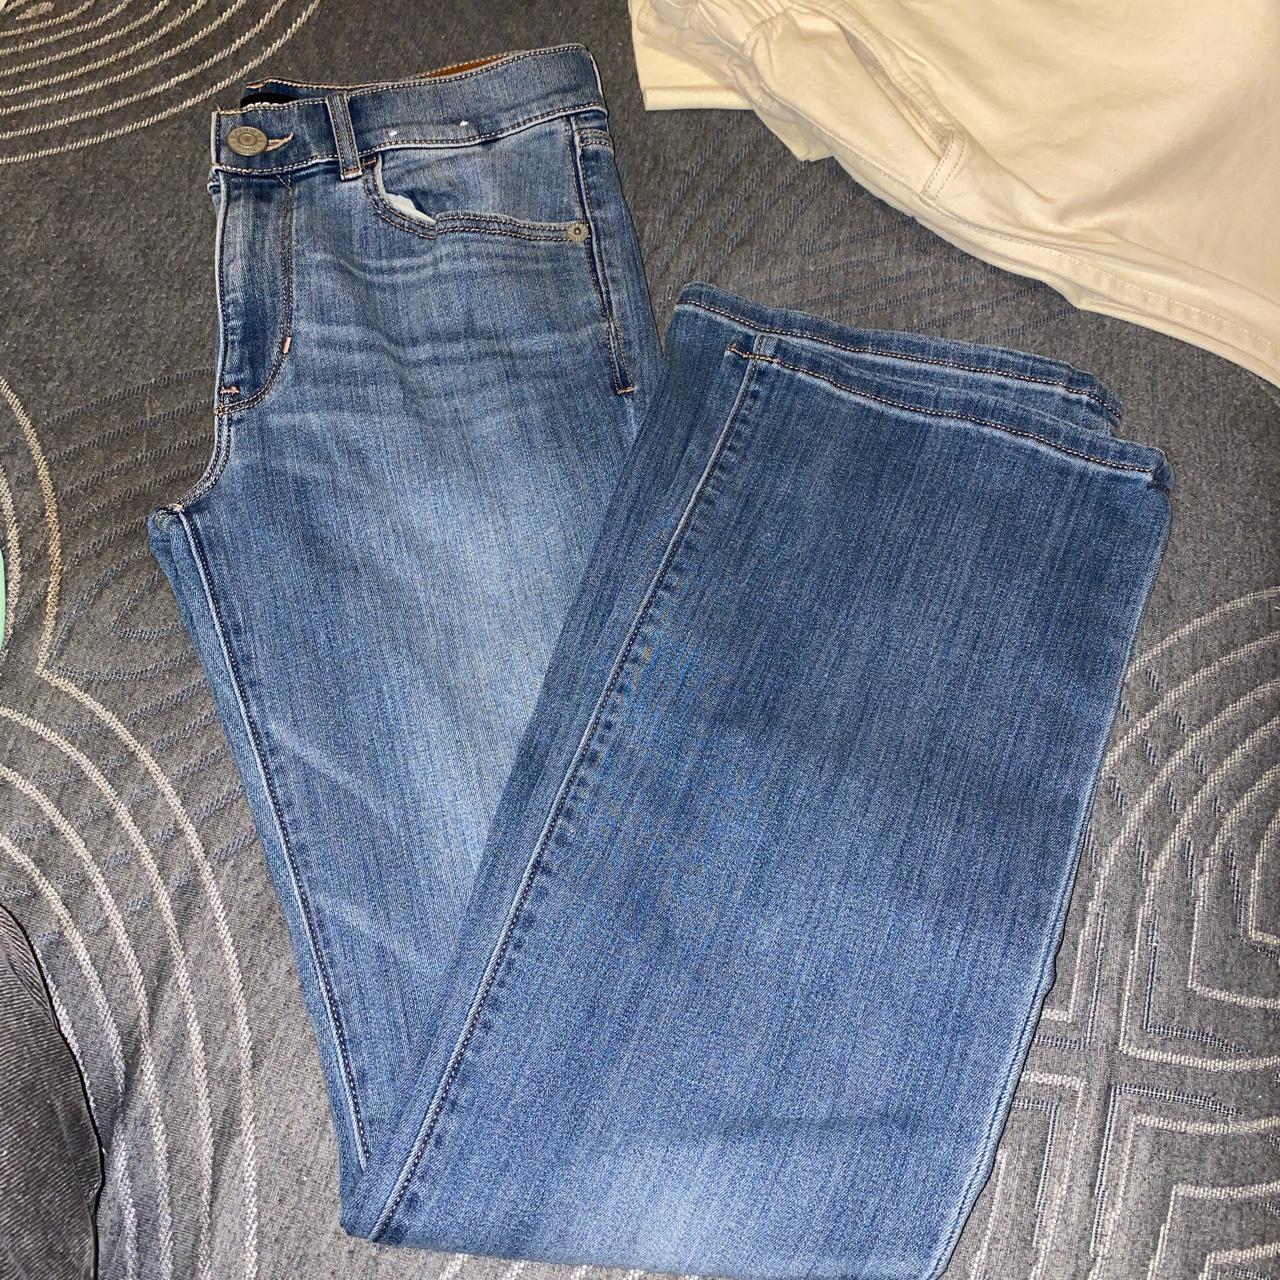 Express barely boot mid rise jeans Size 8R/8R Never... - Depop